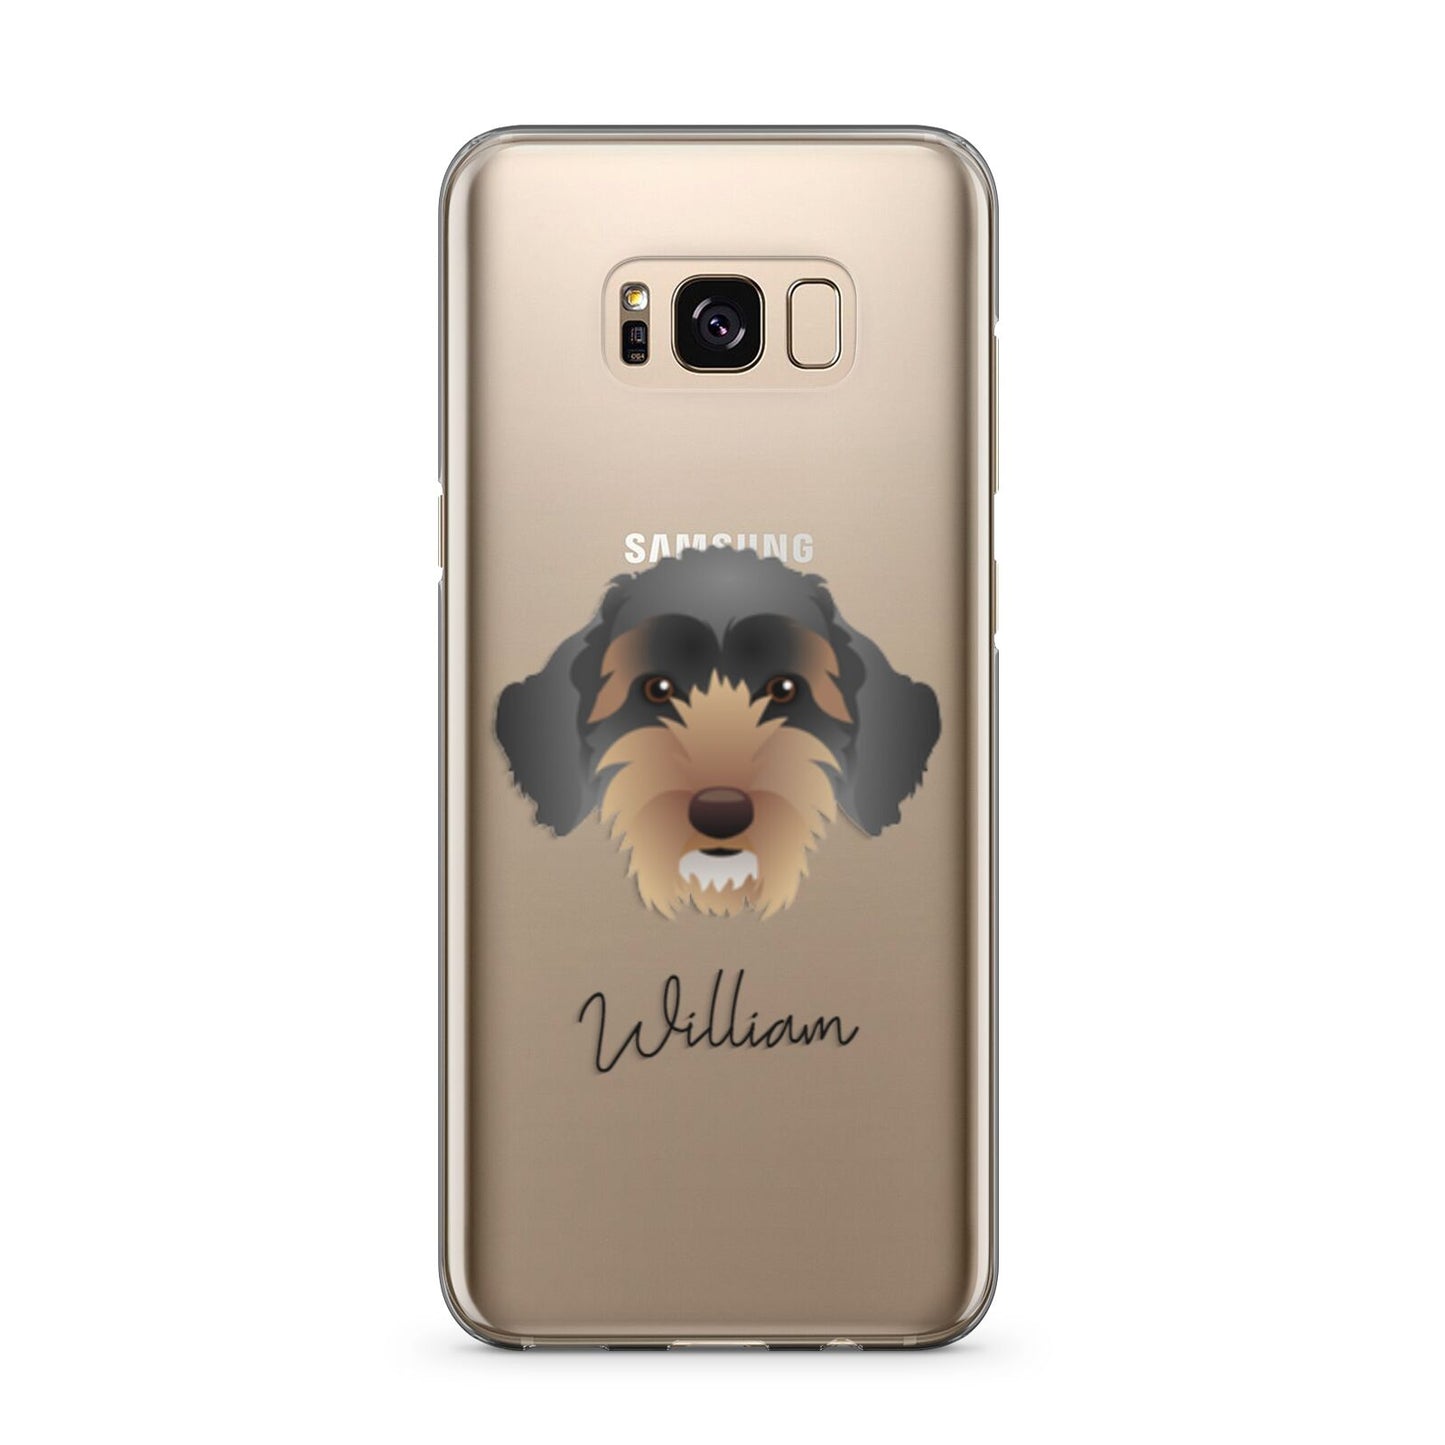 Sproodle Personalised Samsung Galaxy S8 Plus Case